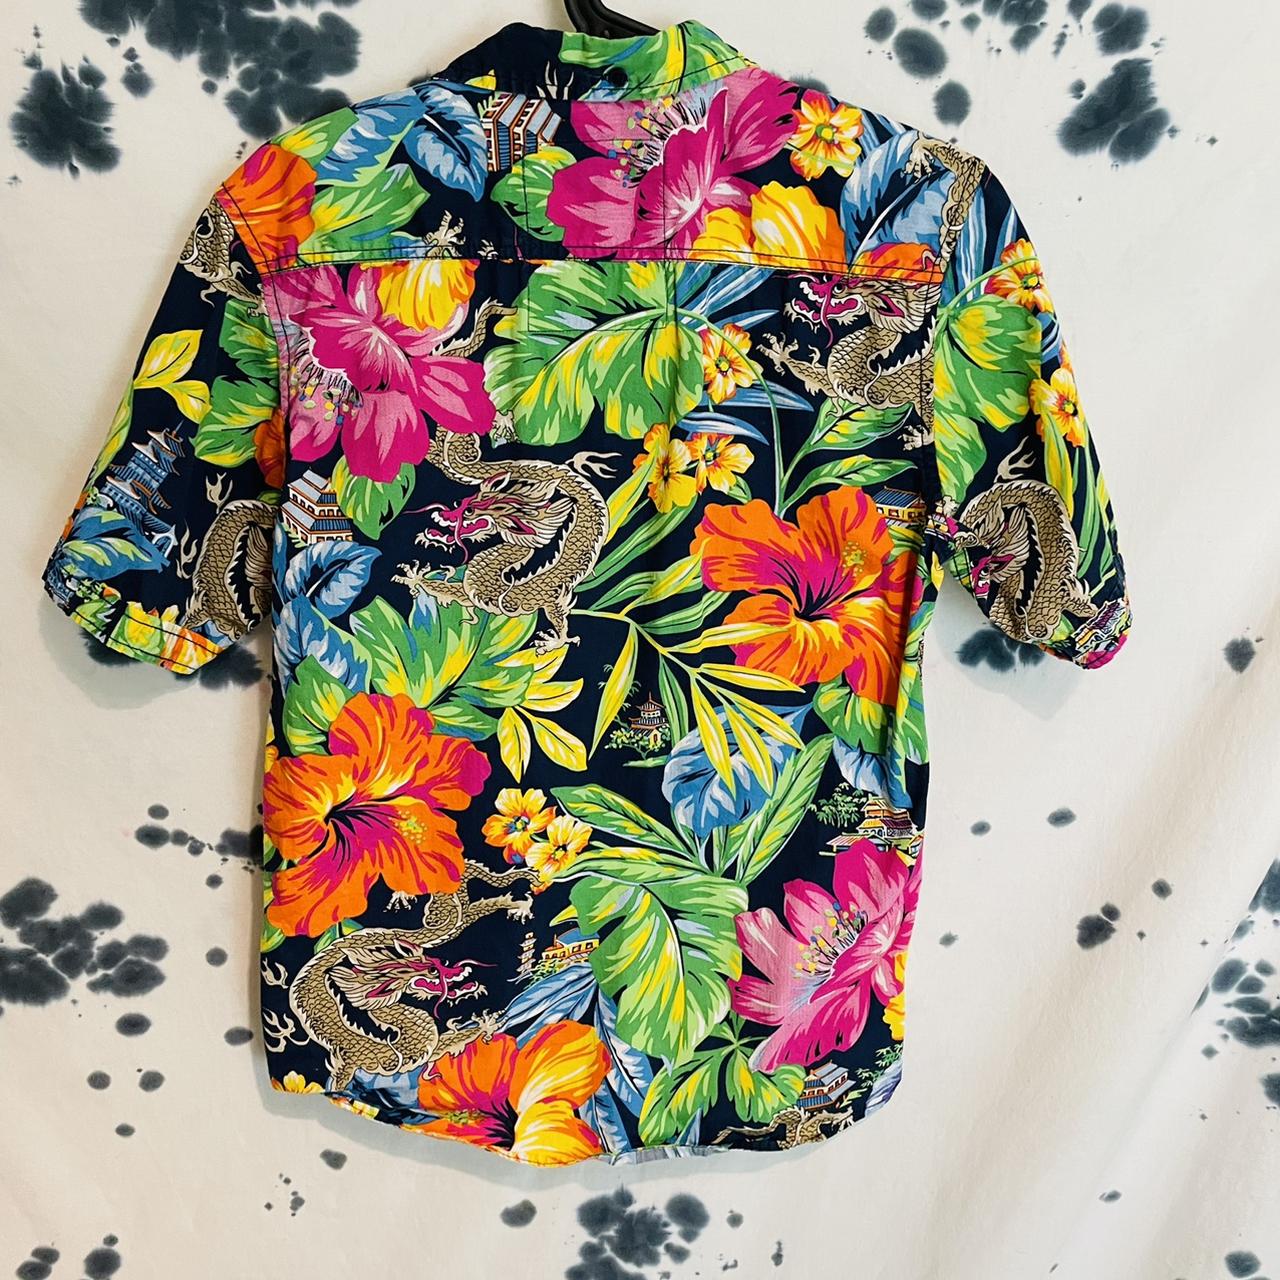 Product Image 2 - Broken Threads Floral/Dragon Button Up

This